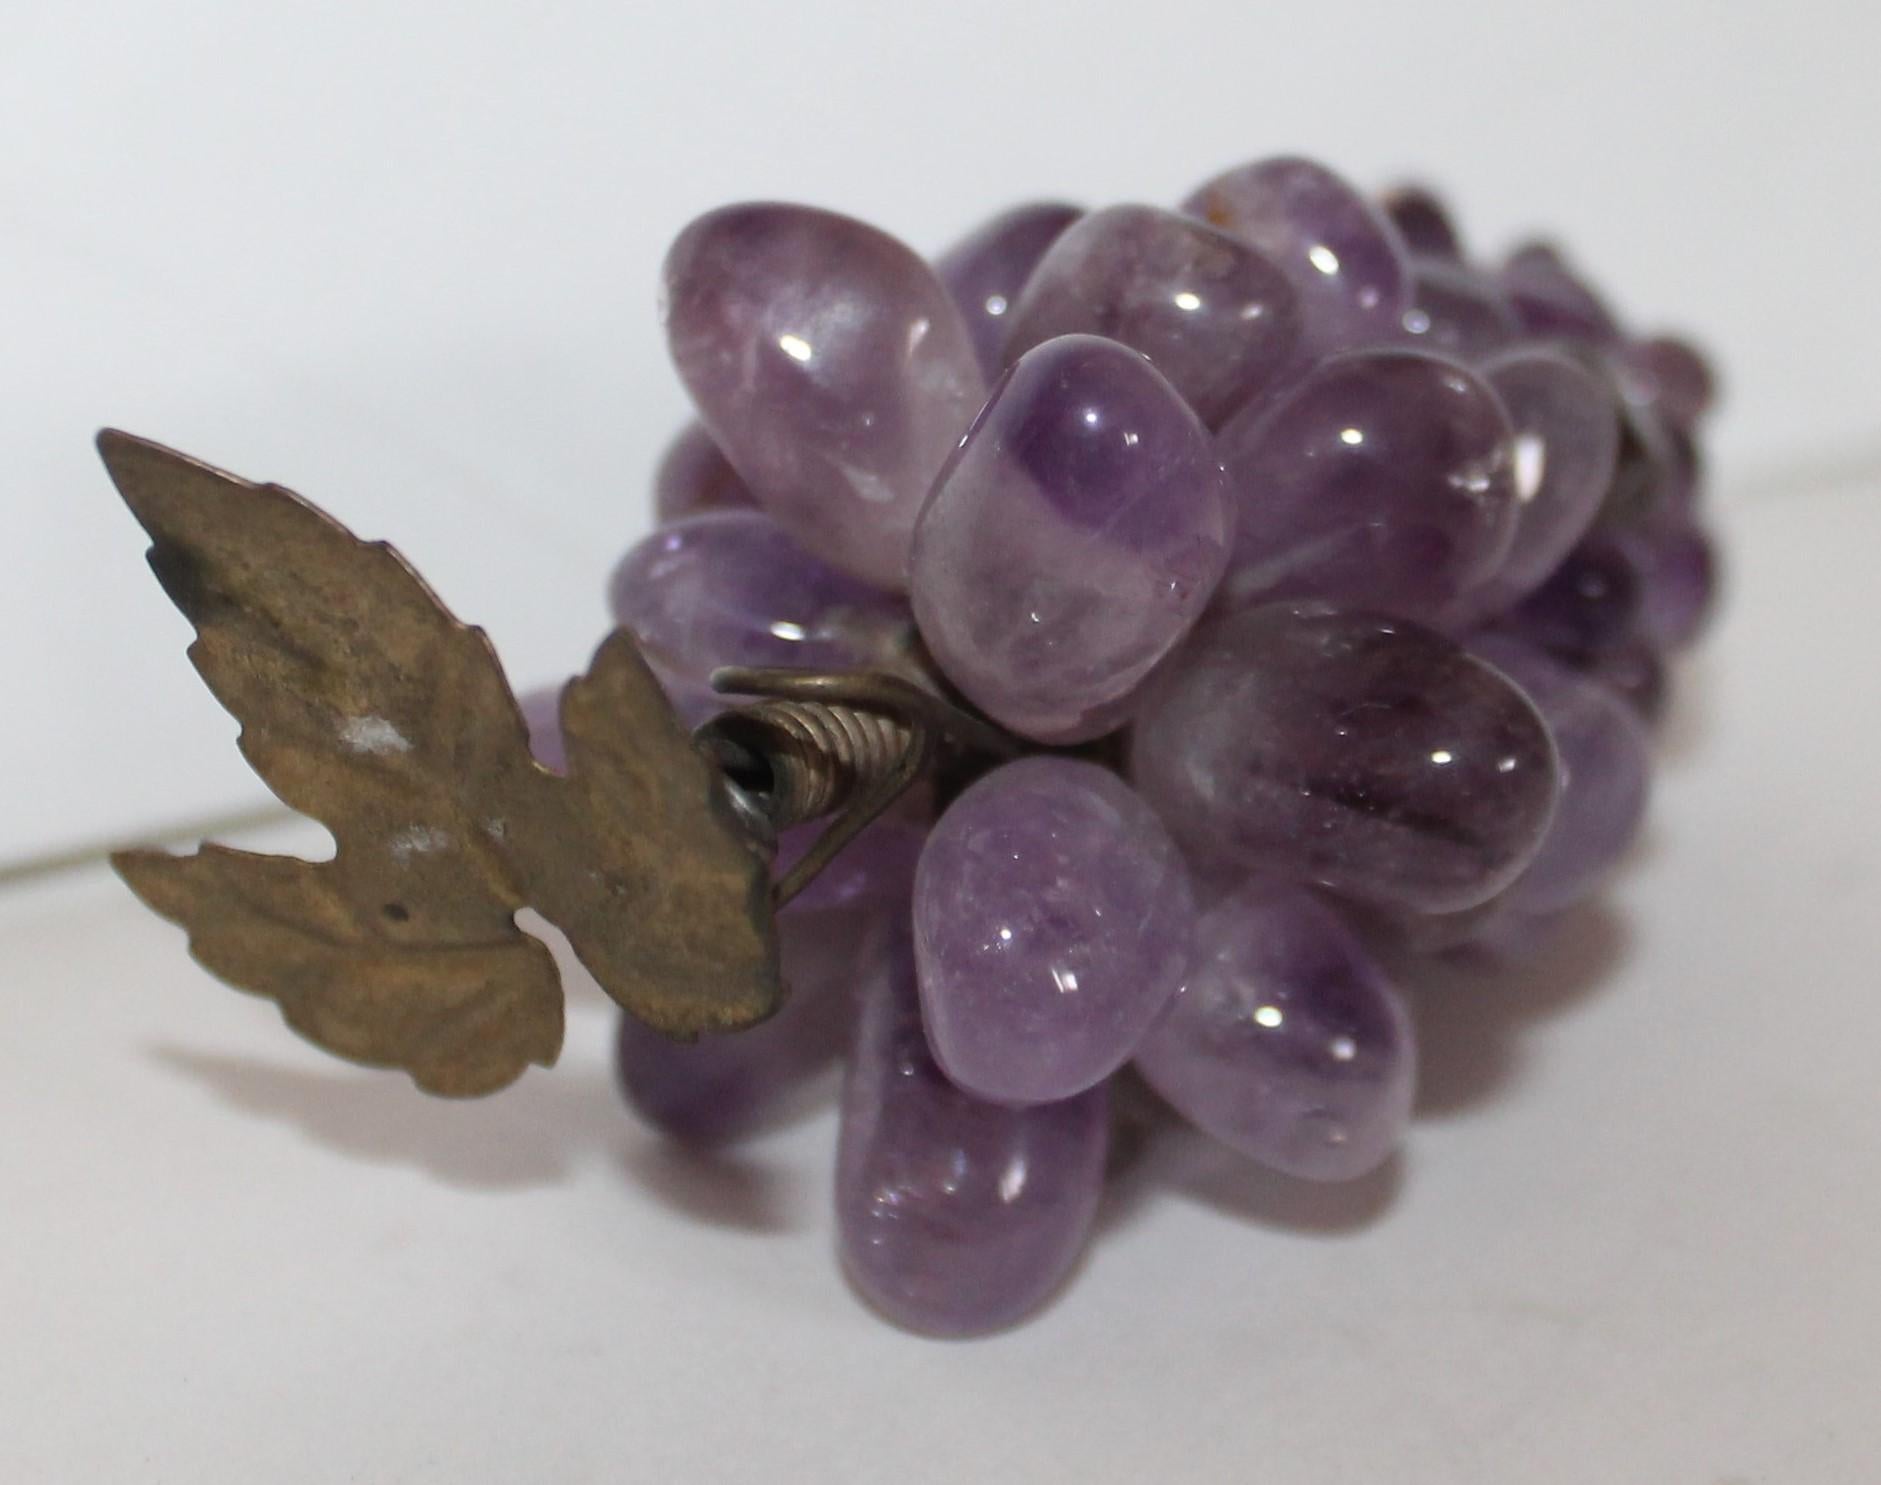 These Italian amethyst mini stone grapes that are wired together and little mini leafs attached. The condition is very good.